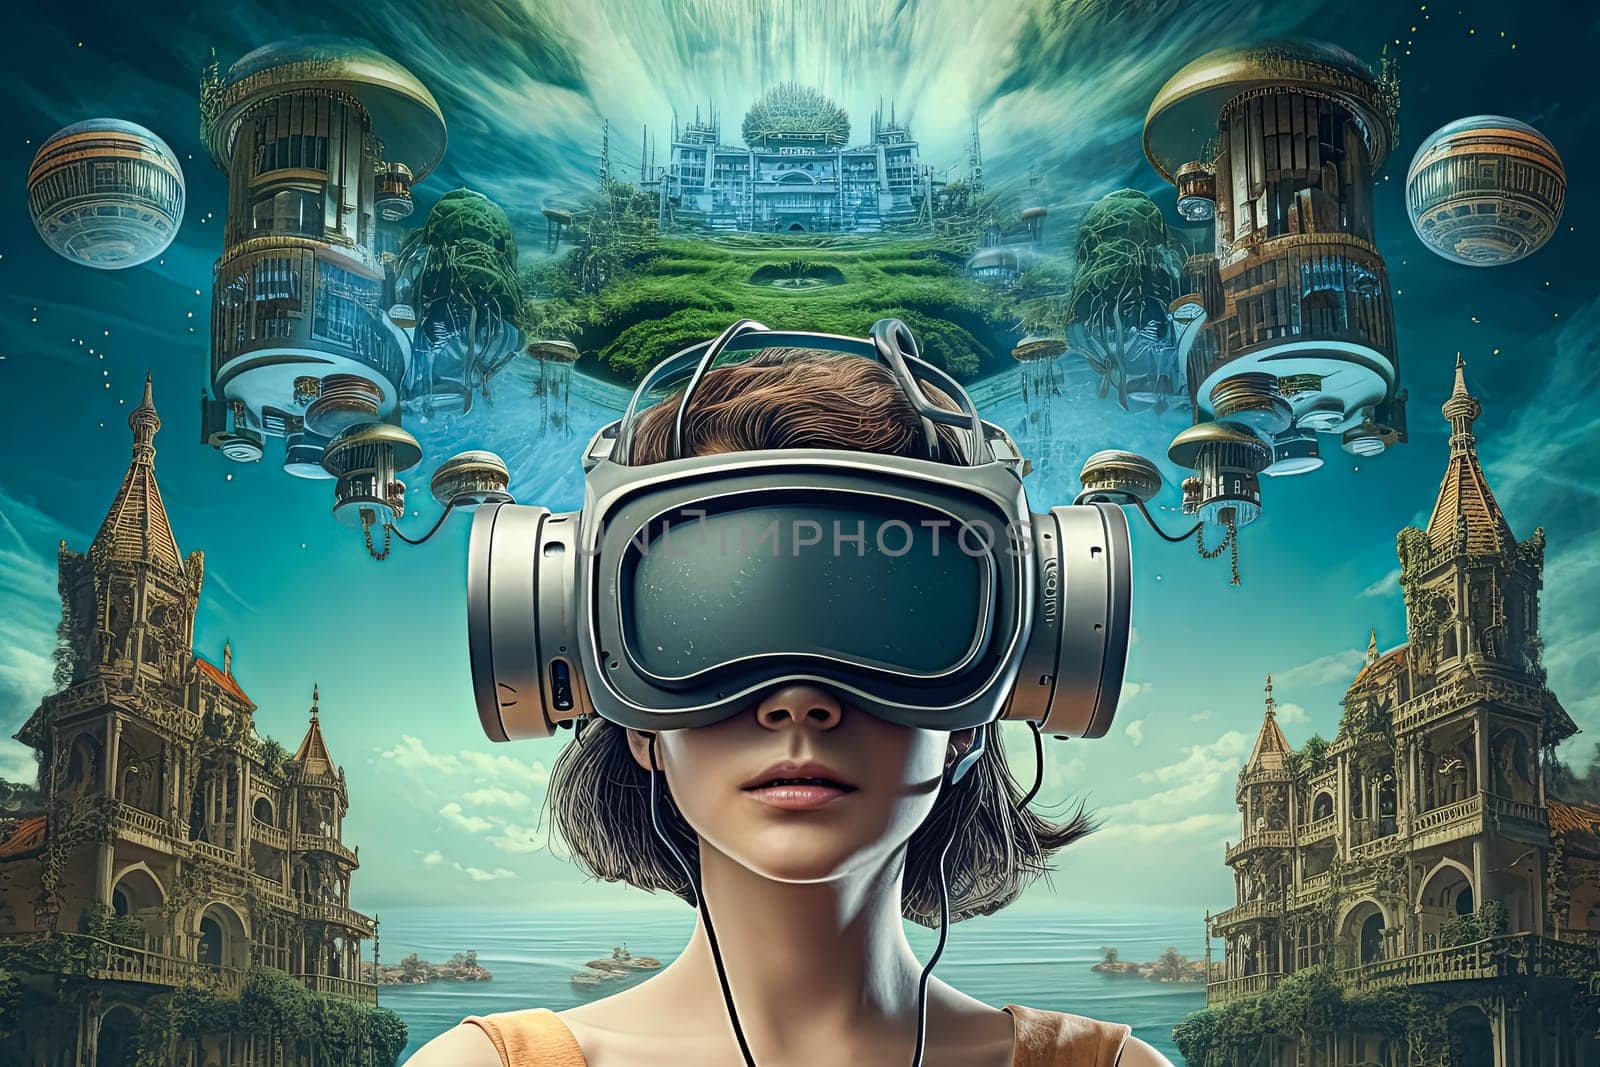 A woman wearing a virtual reality headset is looking at a cityscape. The image is a poster for a virtual reality game